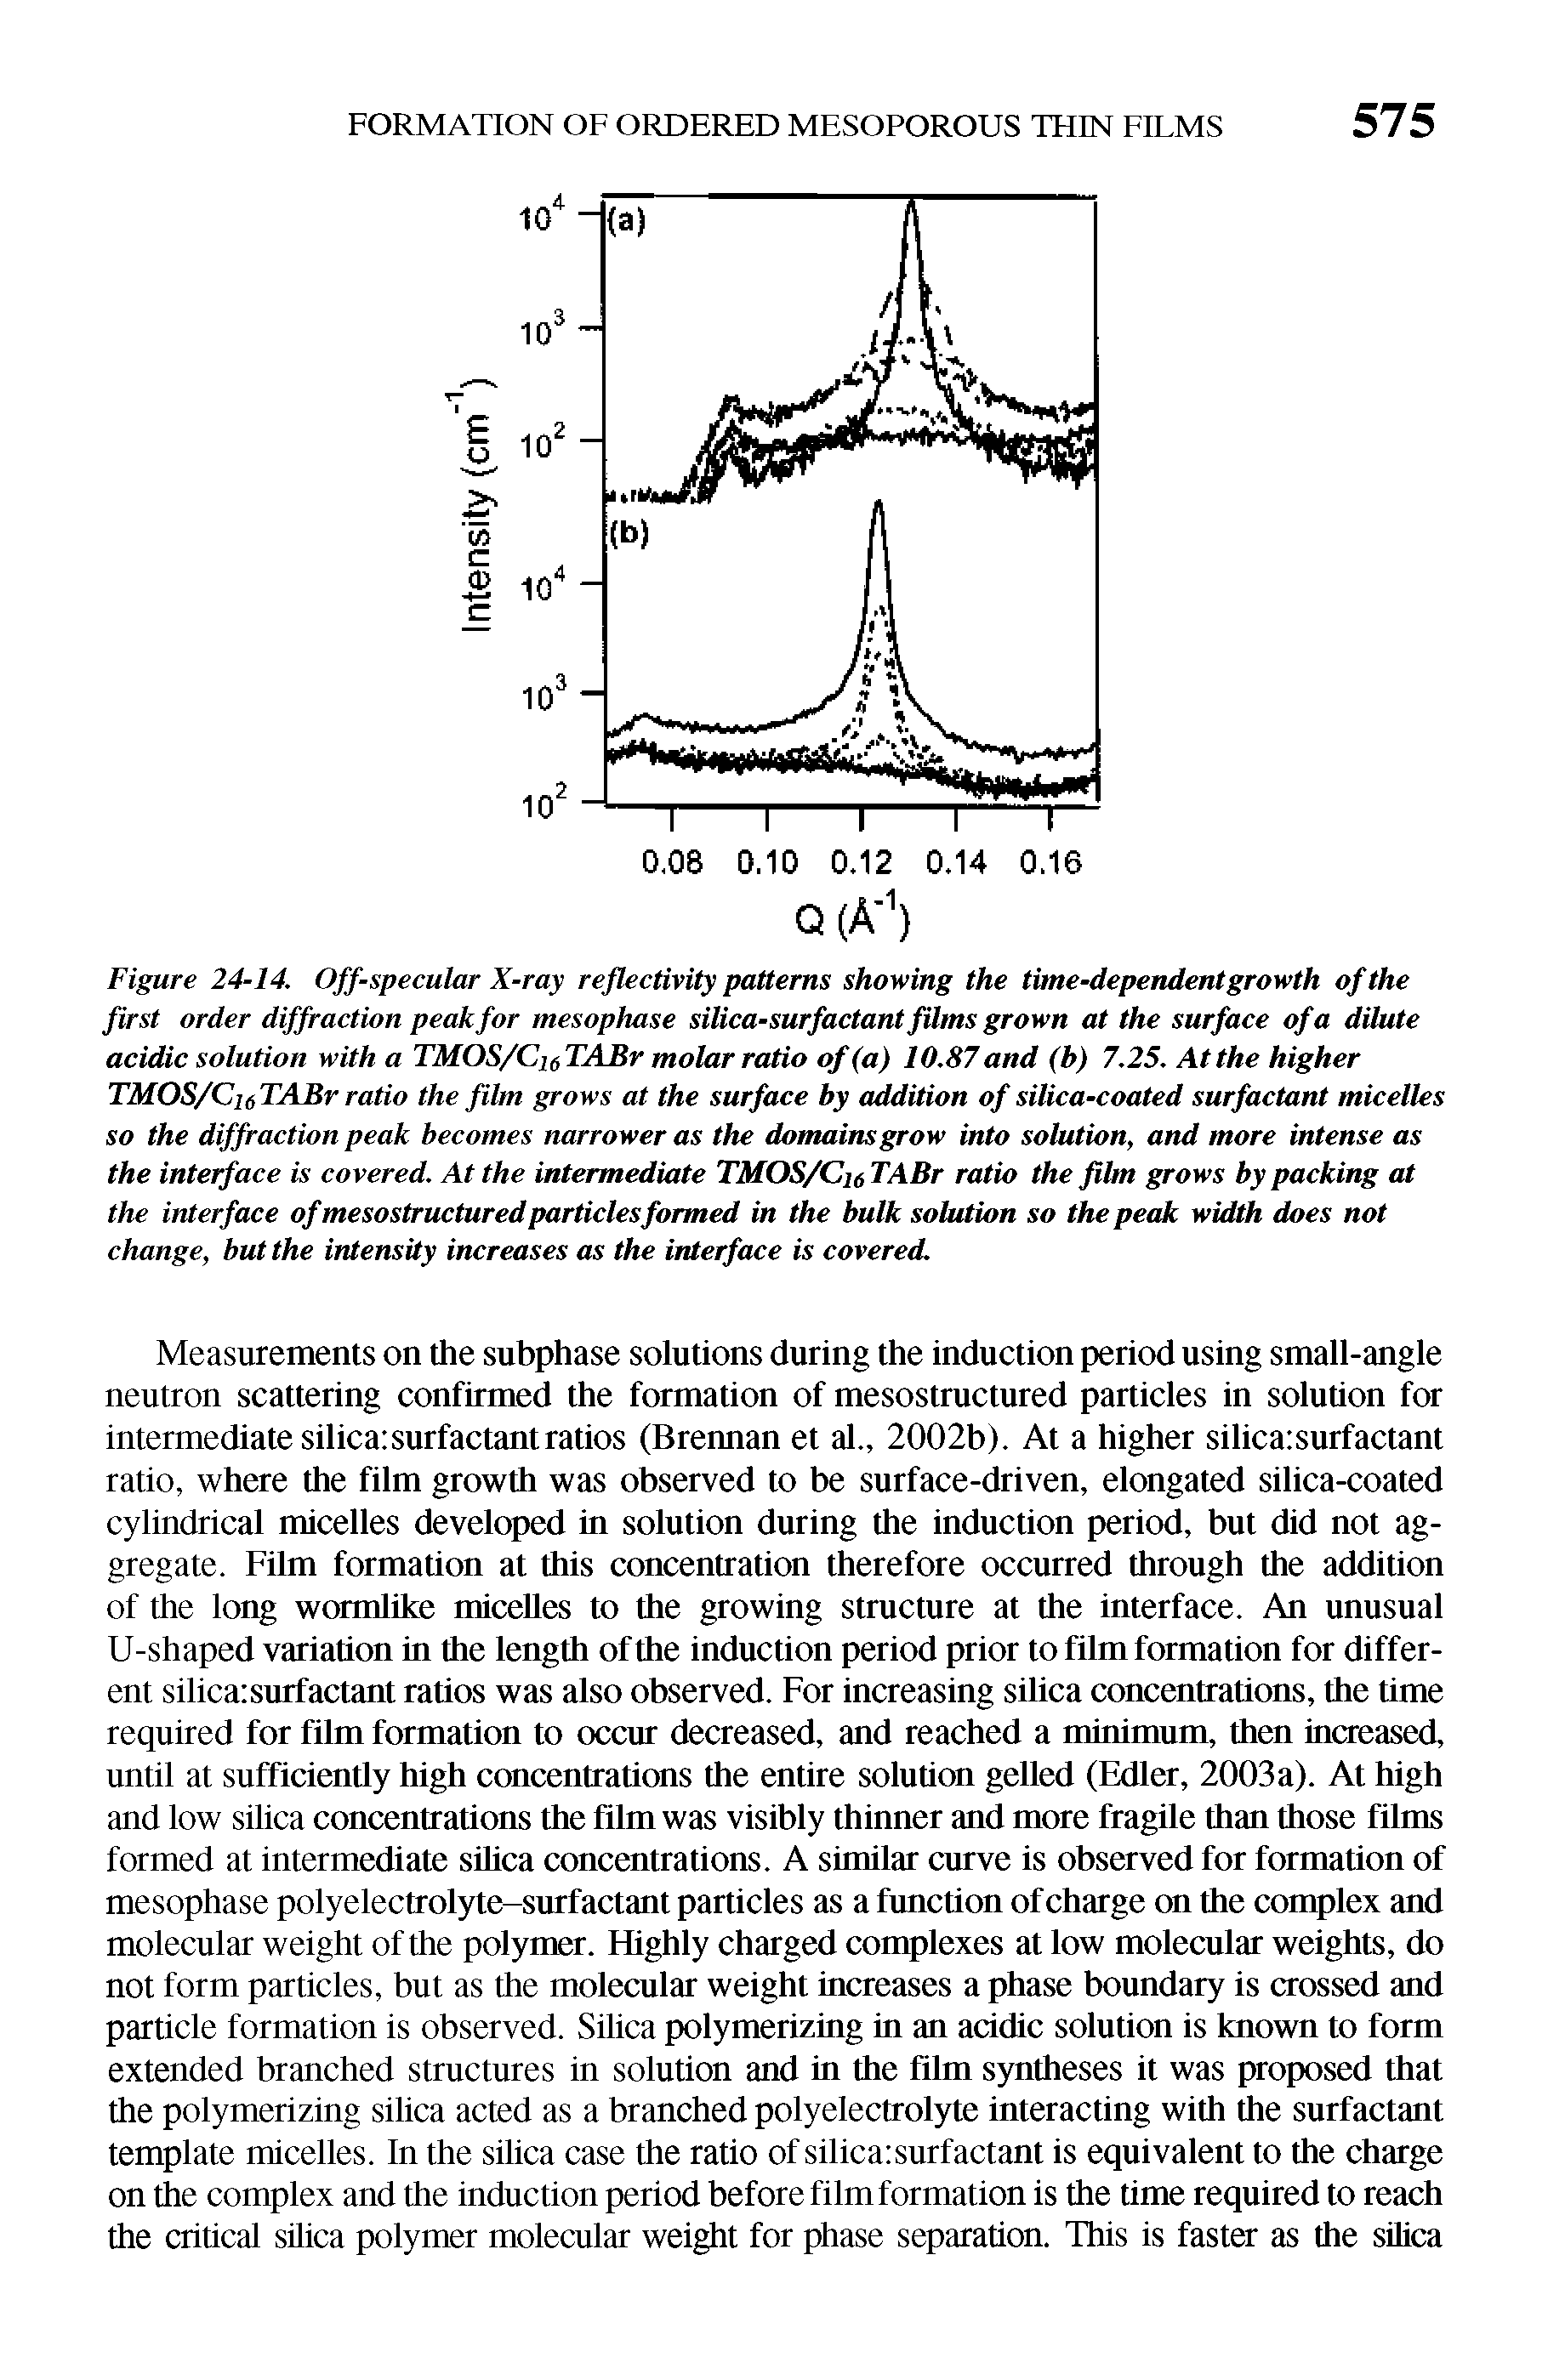 Figure 24-14. Off-specular X-ray reflectivity patterns showing the time-dependent growth of the first order diffraction peak for mesophase silica-surfactant films grown at the surface of a dilute acidic solution with a TMOS/CuTABr molar ratio of (a) 10.87 and (b) 7.25. At the higher TMOS/CuTABr ratio the film grows at the surface by addition of silica-coated surfactant micelles so the diffraction peak becomes narrower as the domains grow into solution, and more intense as the interface is covered. At the intermediate TMOS/Cu TABr ratio the film grows by packing at the interface of mesostructured particles formed in the bulk solution so the peak widtii does not change, but the intensity increases as the interface is covered.